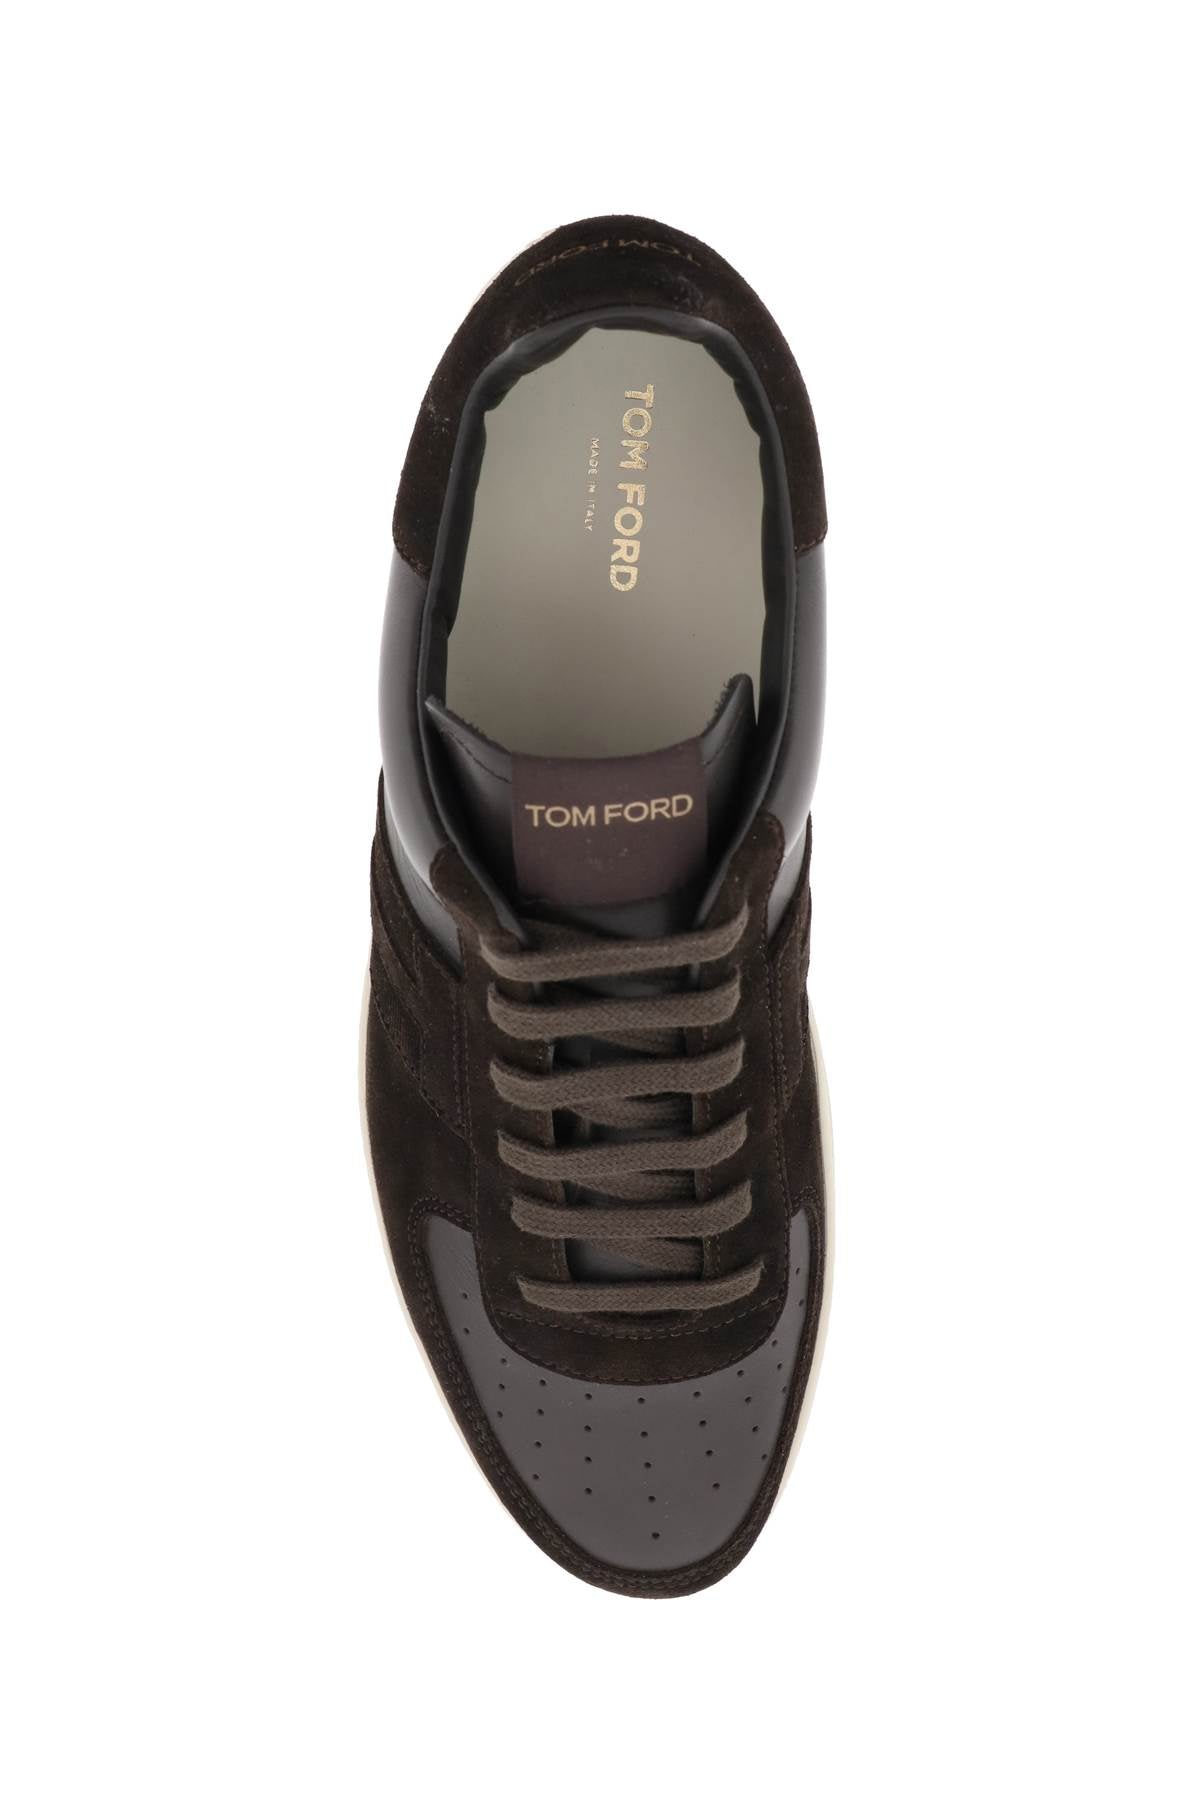 Tom ford suede and leather 'radcliffe' sneakers-1